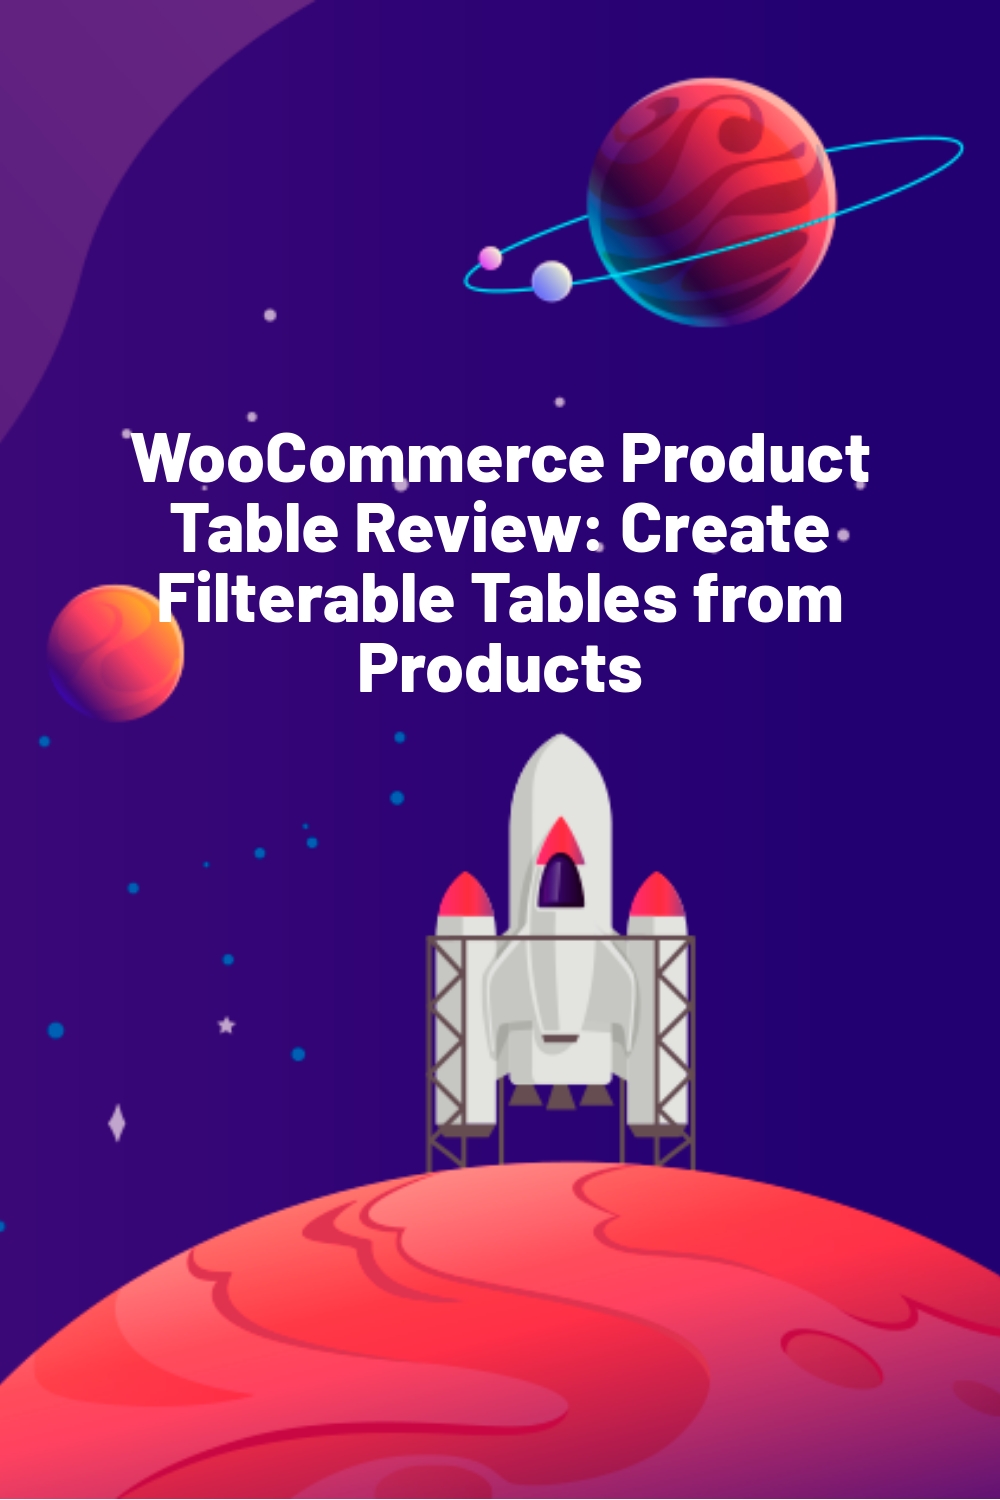 WooCommerce Product Table Review: Create Filterable Tables from Products